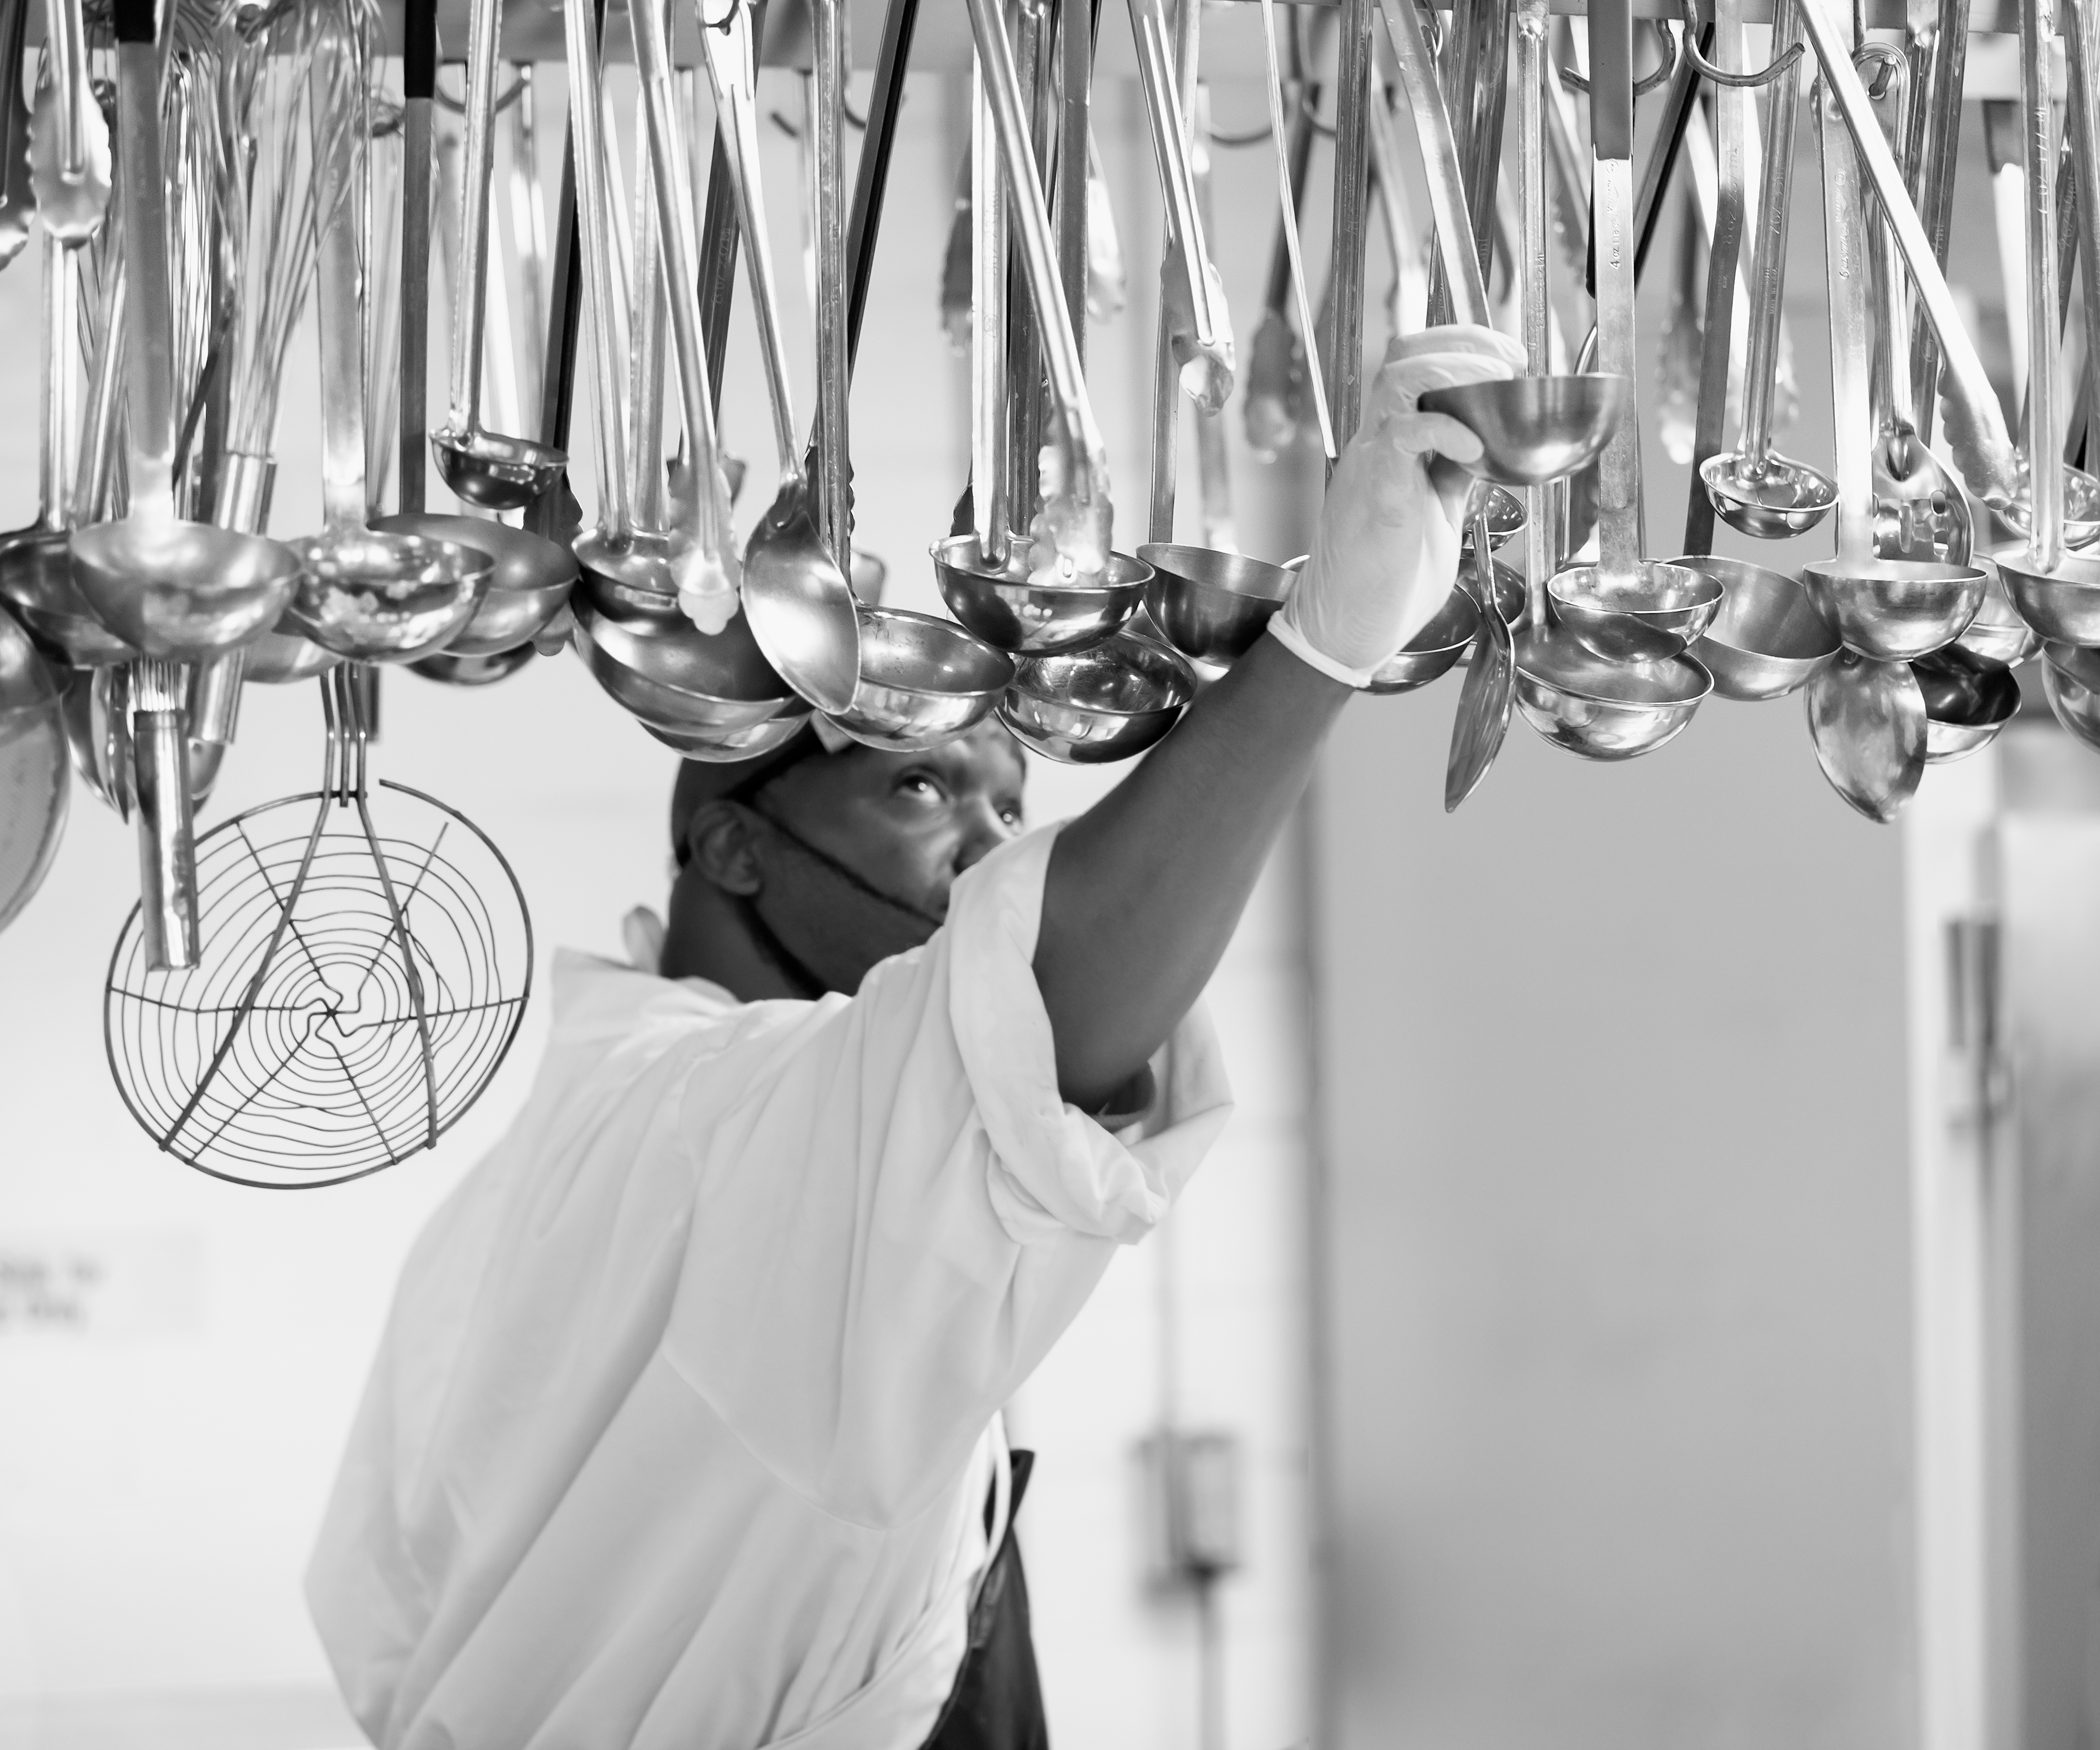 A man in chefs whites reaches up to grab a ladle hung from a rack above his head